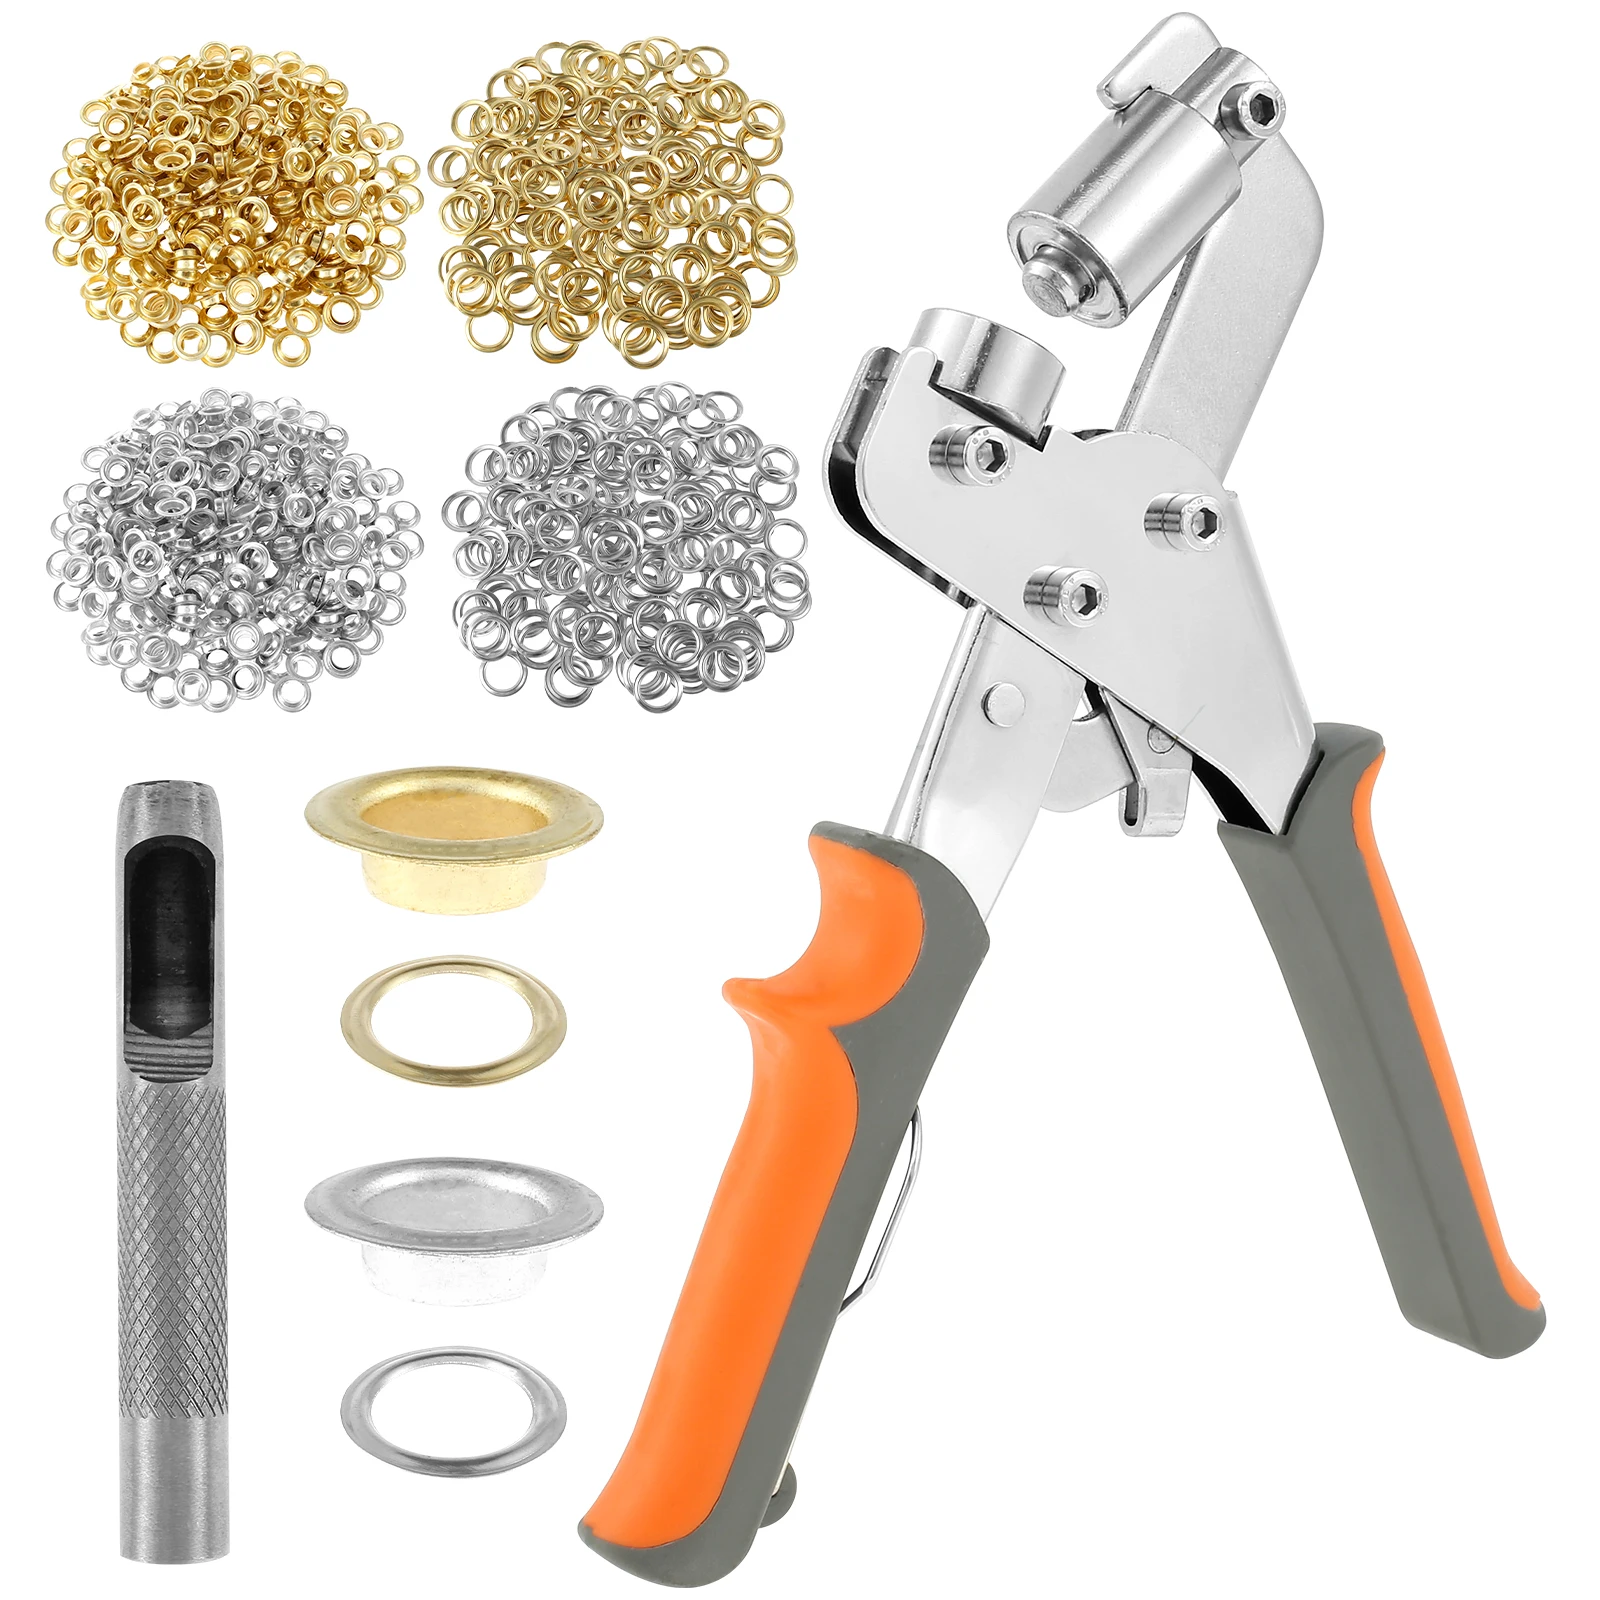 Grommet Tool Kit Handheld Hole Punch Pliers Grommet Hand Press Machine Manual Puncher with 500 Sets Metal Eyelets Grommets Kit